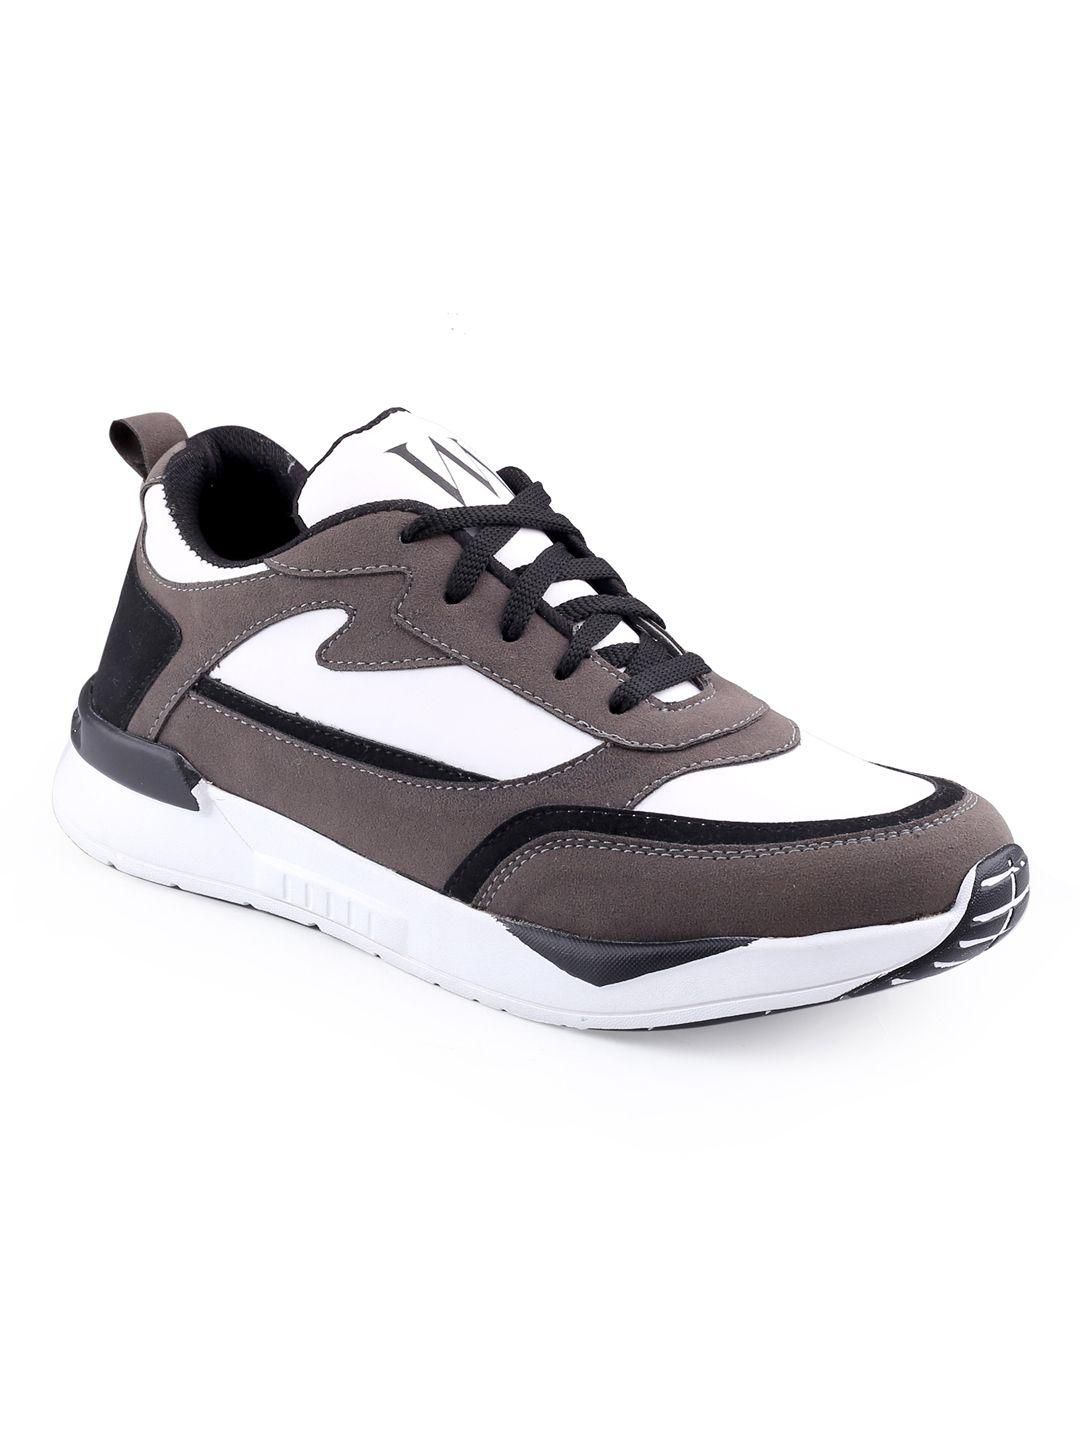 WONKER Shoes - Buy Latest WONKER Shoes Online in India | Myntra